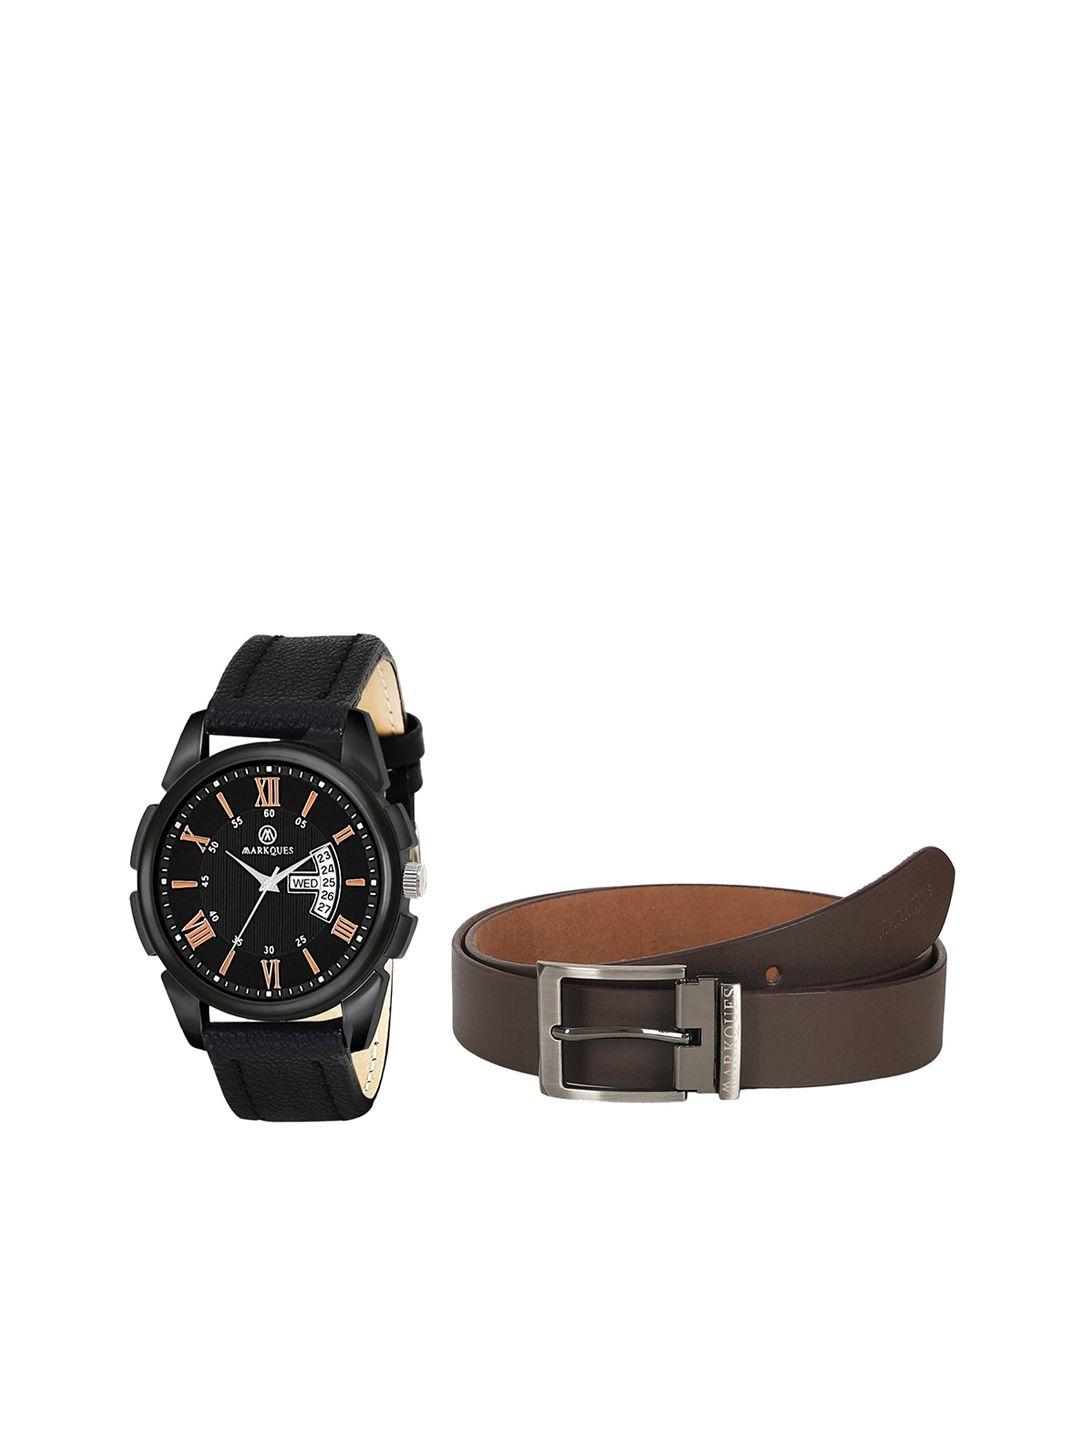 markques men solid leather watch and belt combo gift set